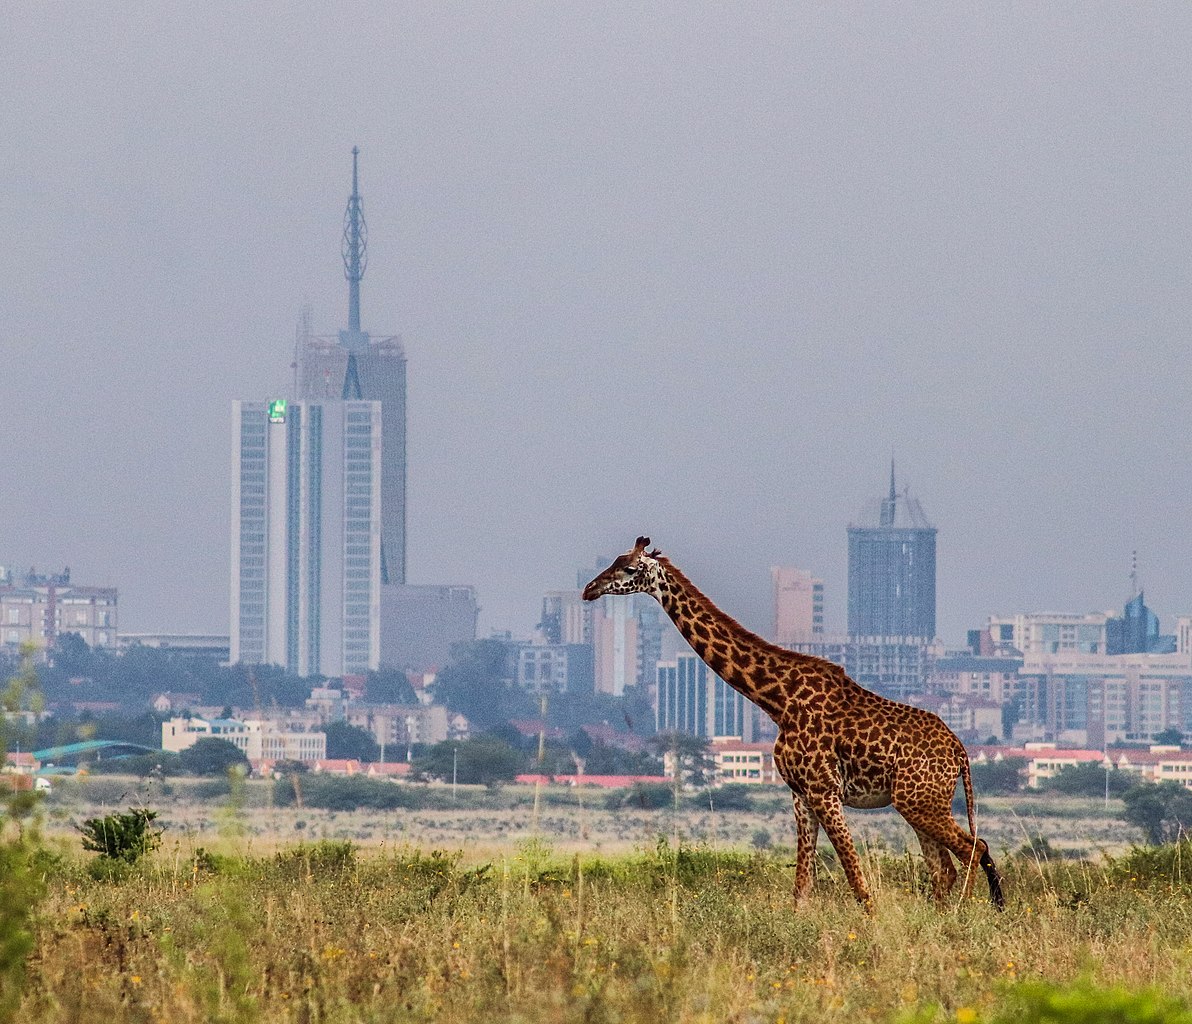 File:A giraffe the tallest animal in Kenya at Nairobi National Park with a  background of Britam Tower the tallest building in  - Wikipedia